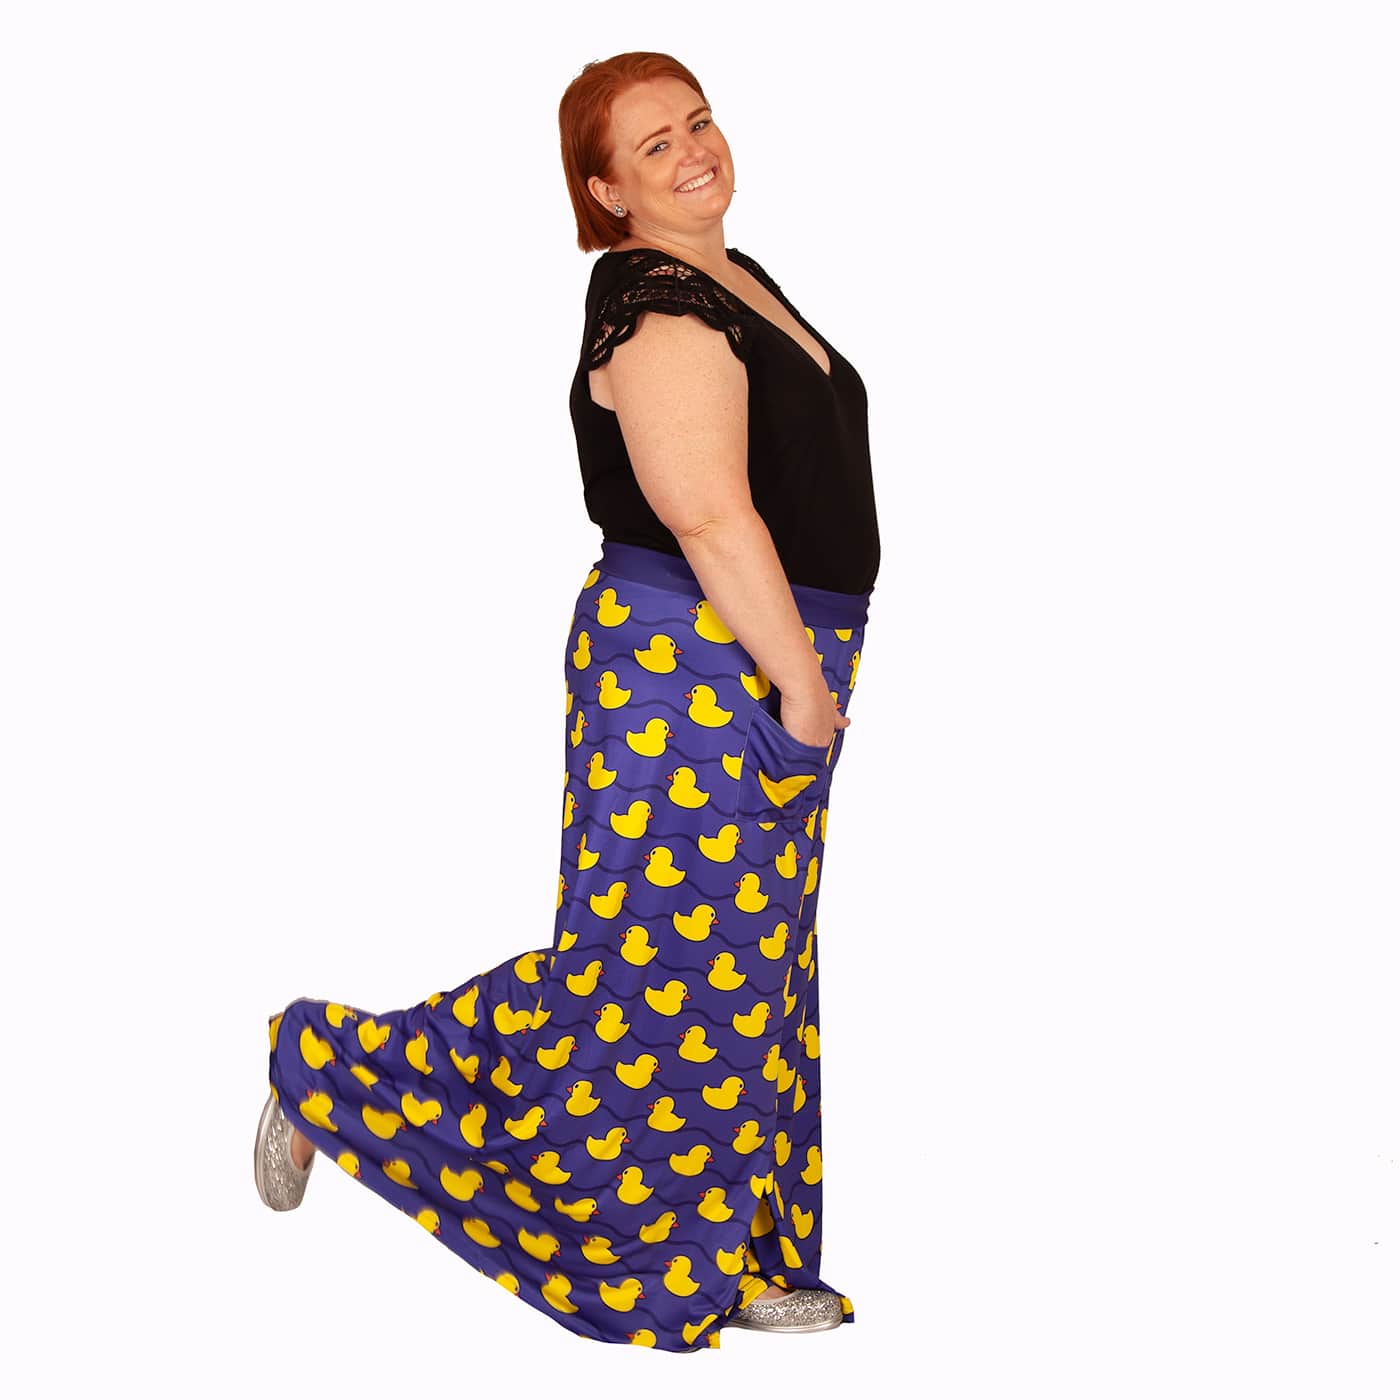 Yellow Ducky Wide Leg Pants by RainbowsAndFairies.com.au (Rubber Duck - Sesame St - Pants With Pockets - Pallzao Pants - Flares - Bell Bottoms) - SKU: CL_WIDEL_DUCKY_YEL - Pic-07